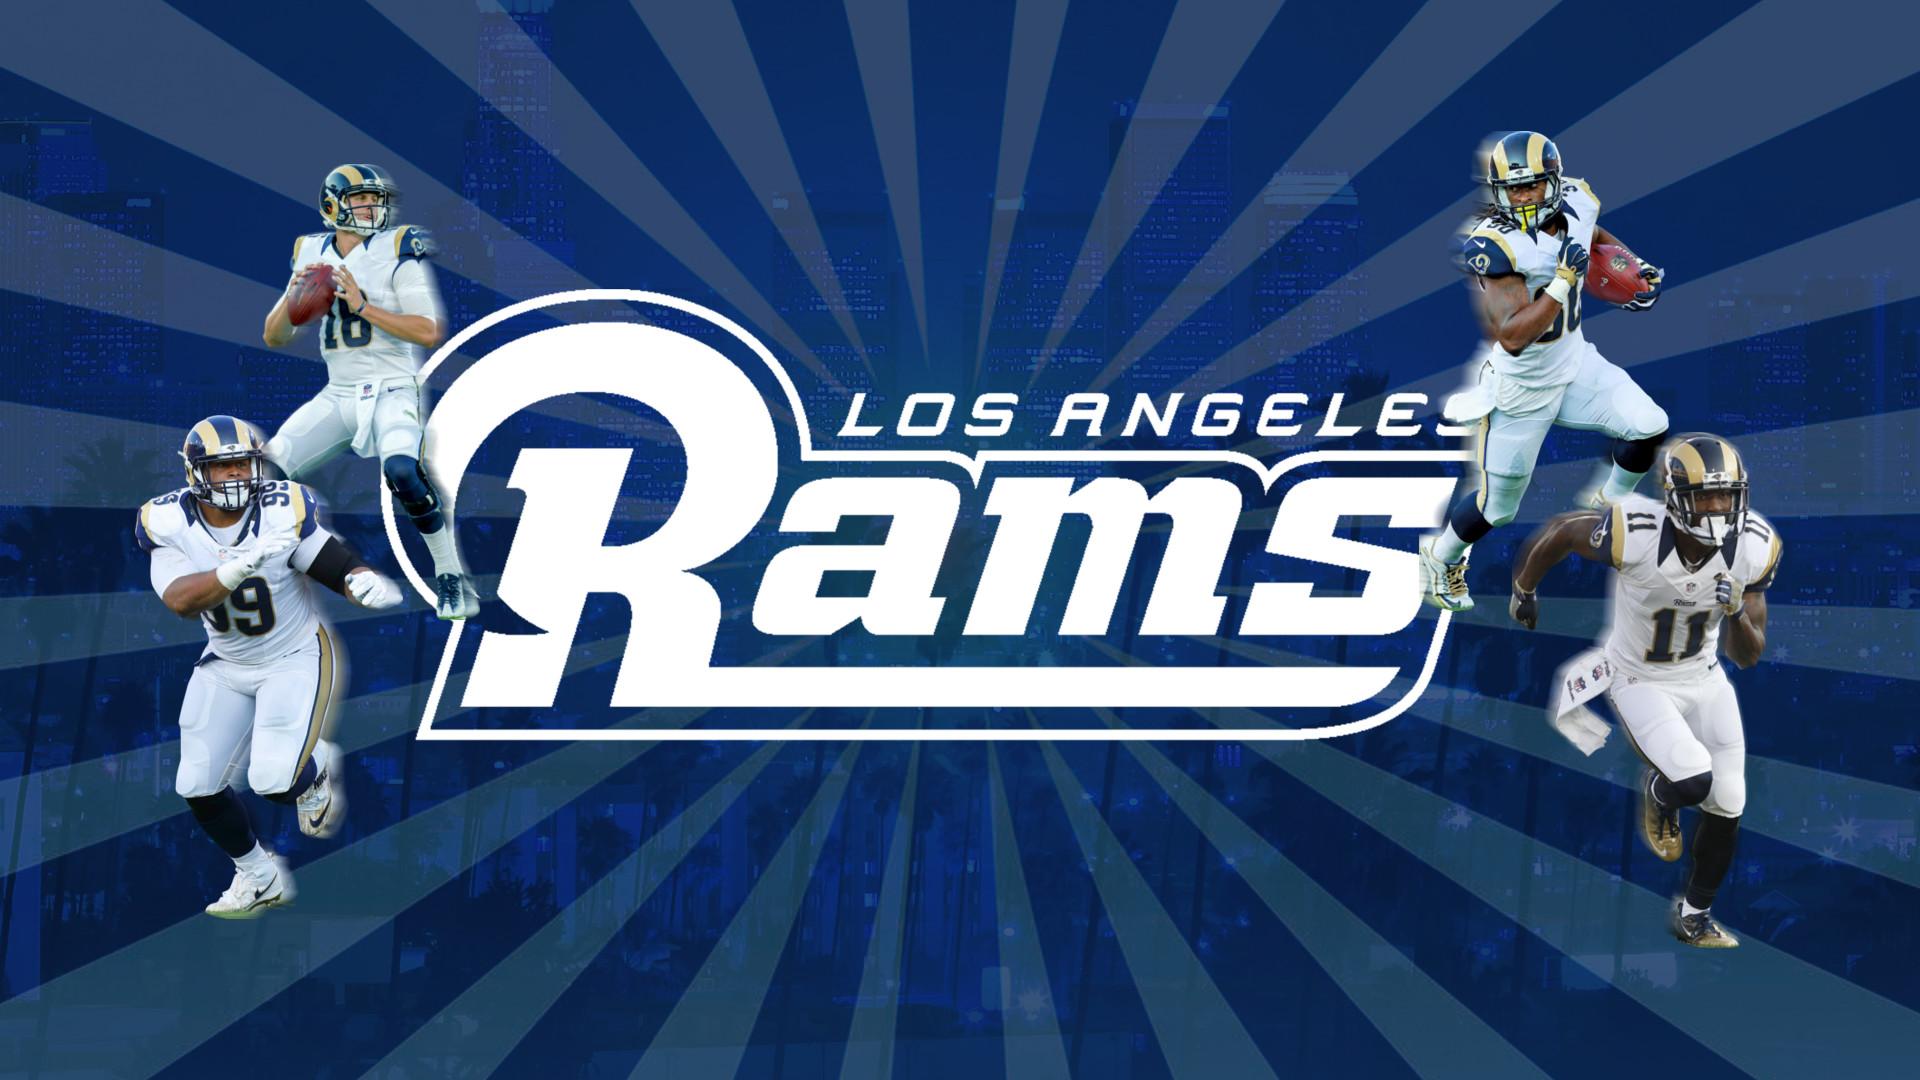 St Louis Rams Wallpaper background picture